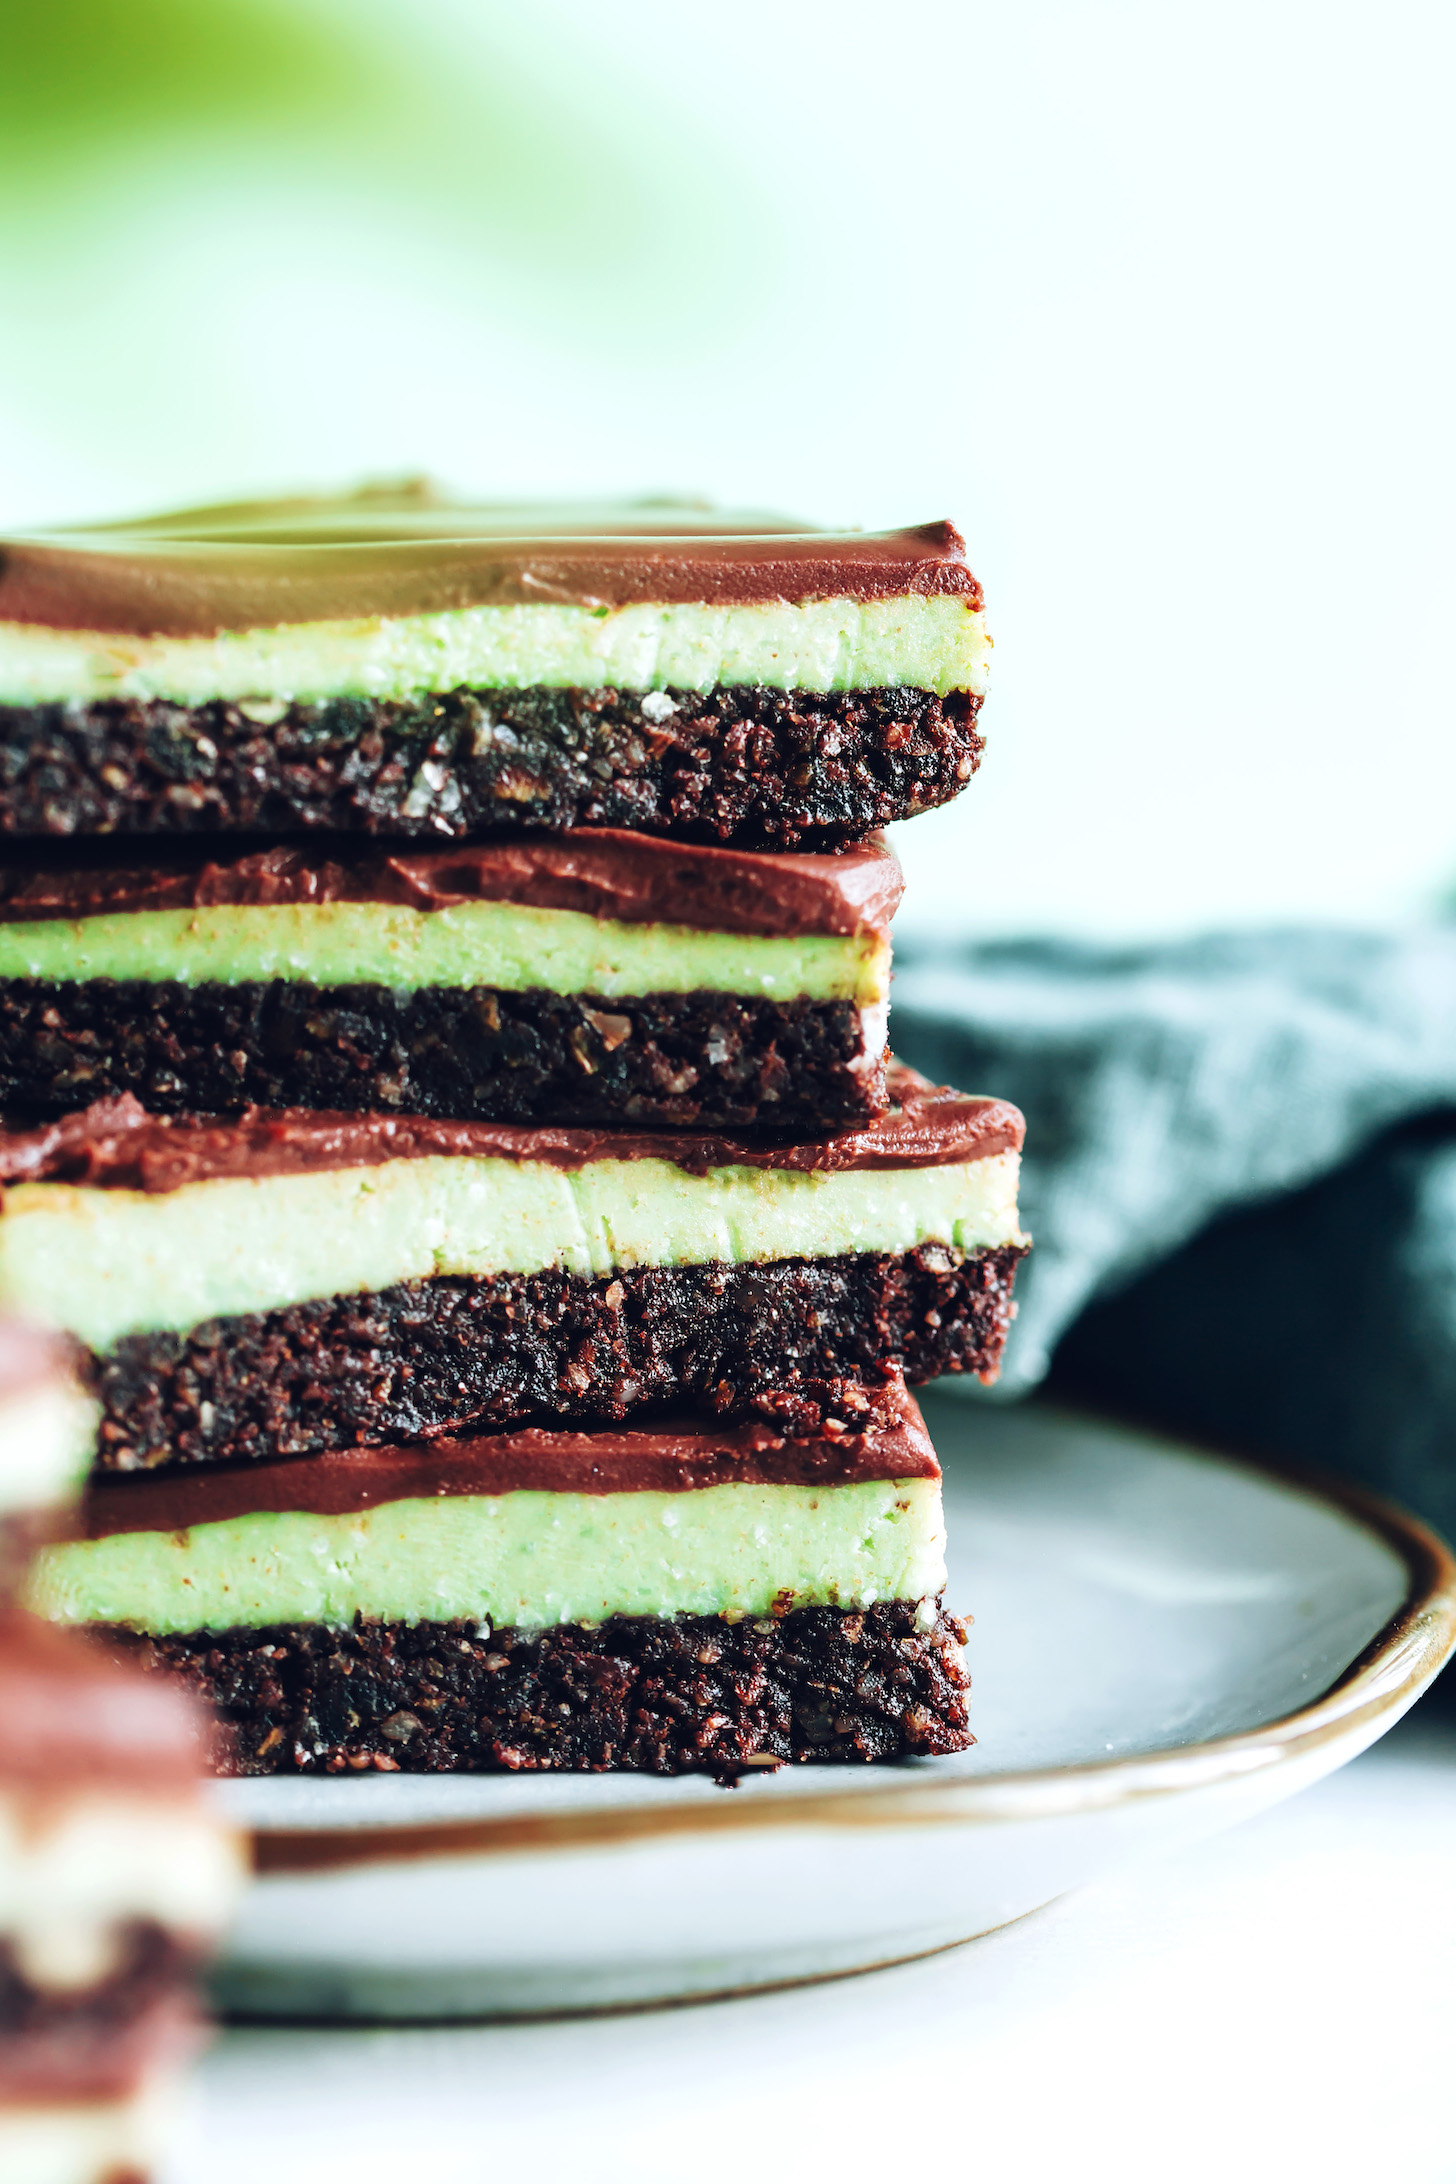 Plate with a stack of no-bake chocolate mint brownie bars